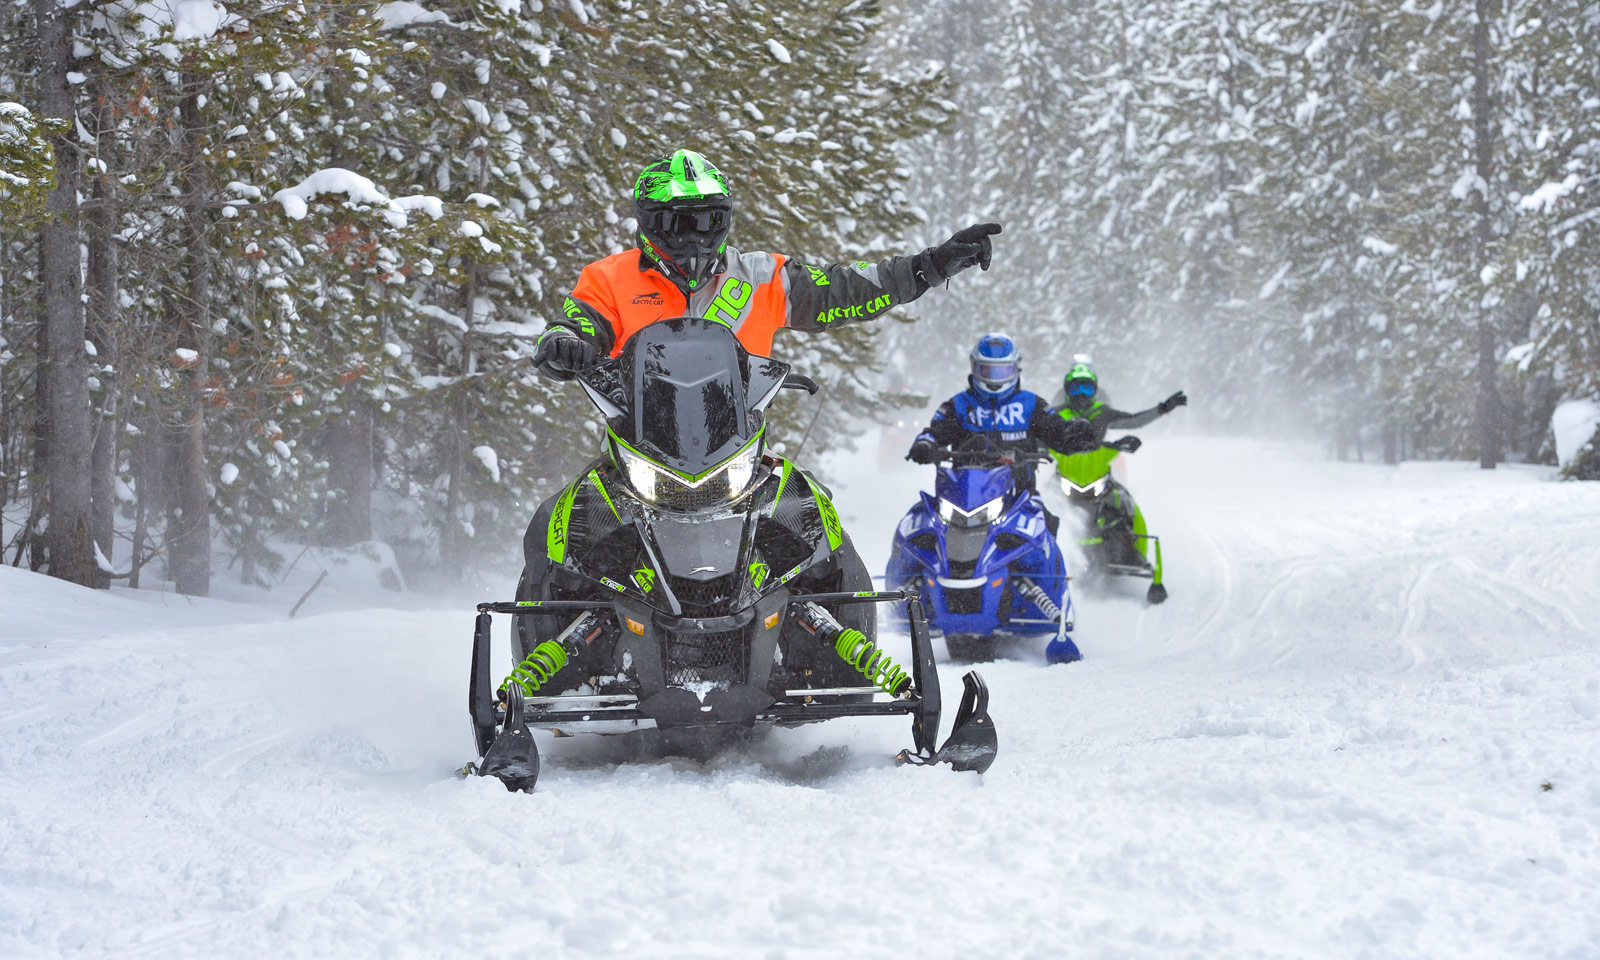 Snowmobilers showing hand signals on trail